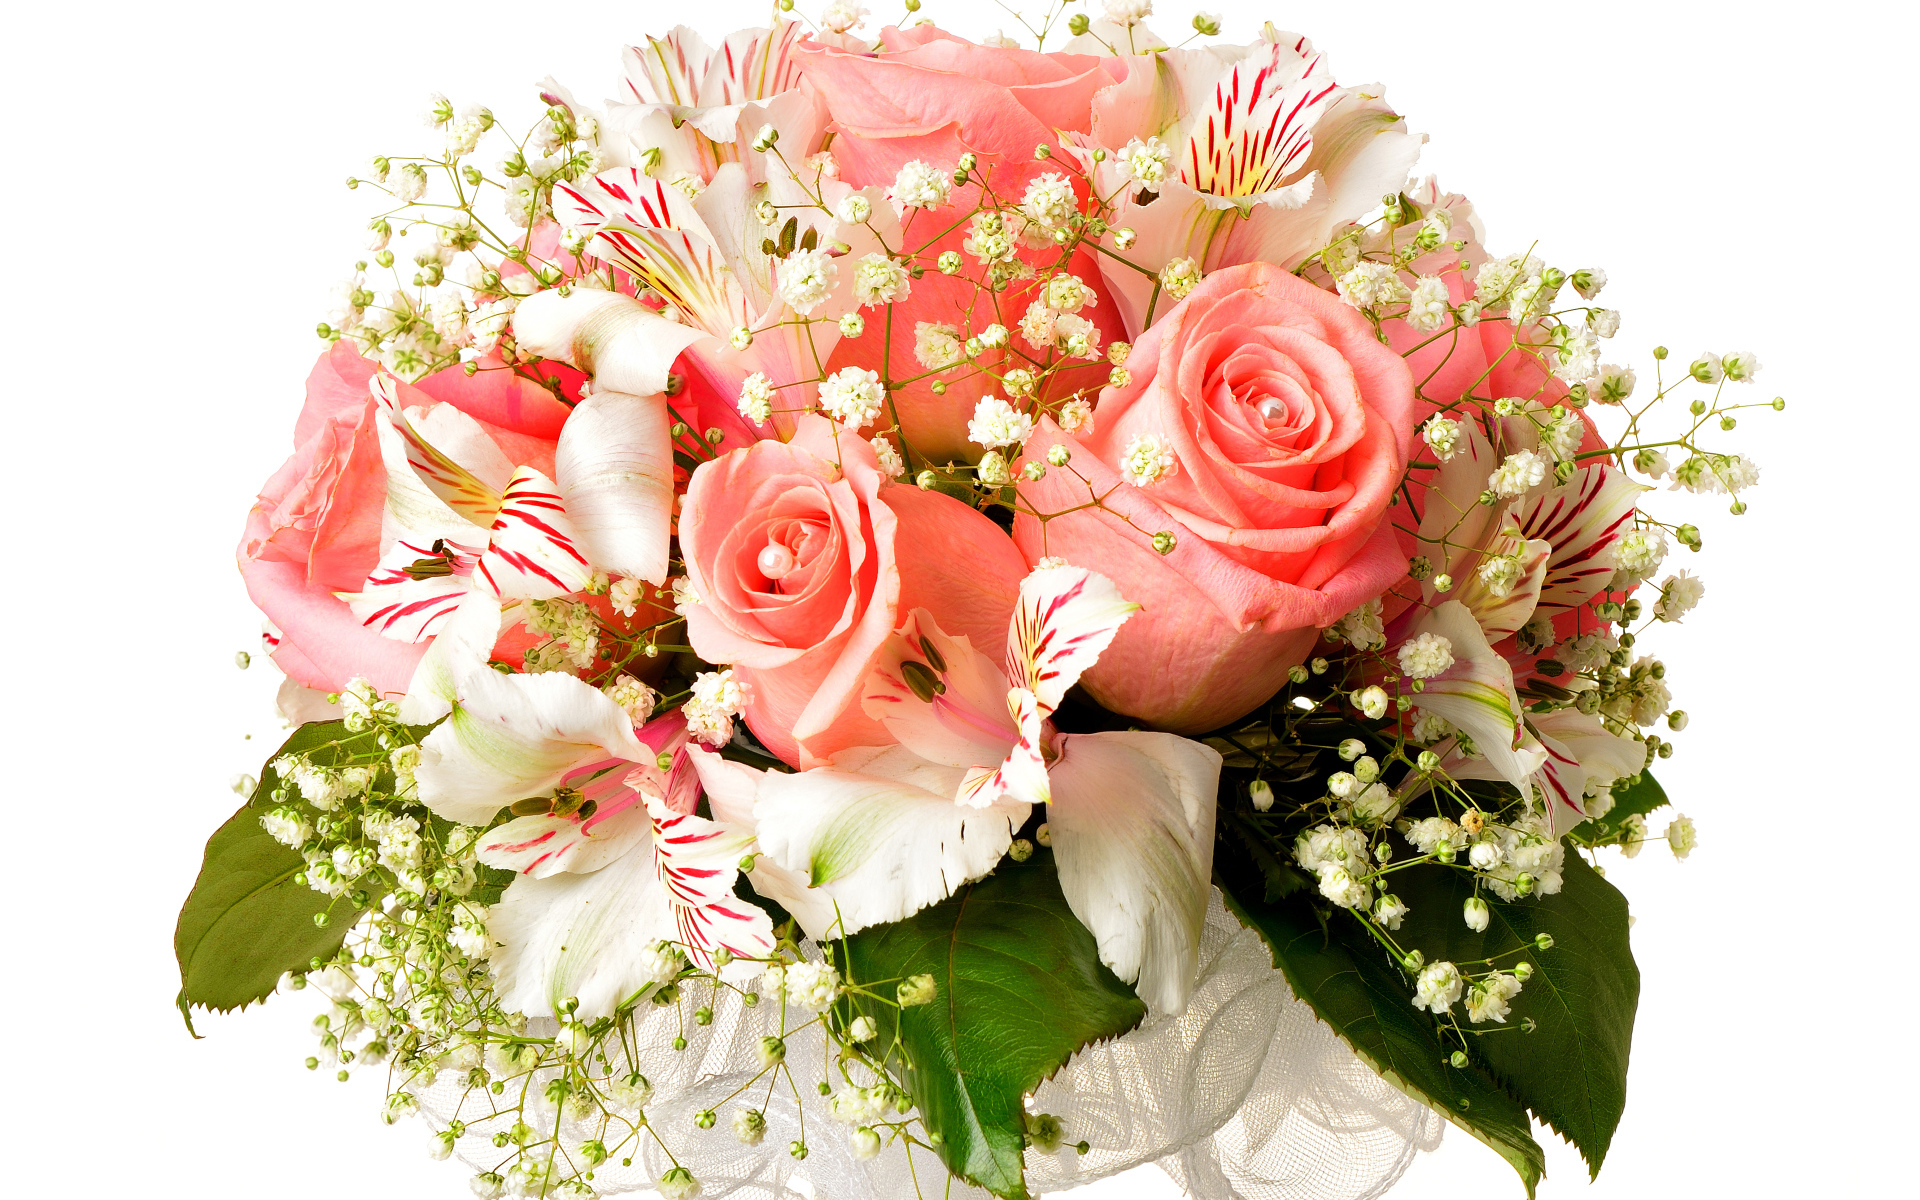 Bouquet of pink roses with alstromeria flowers on a white background